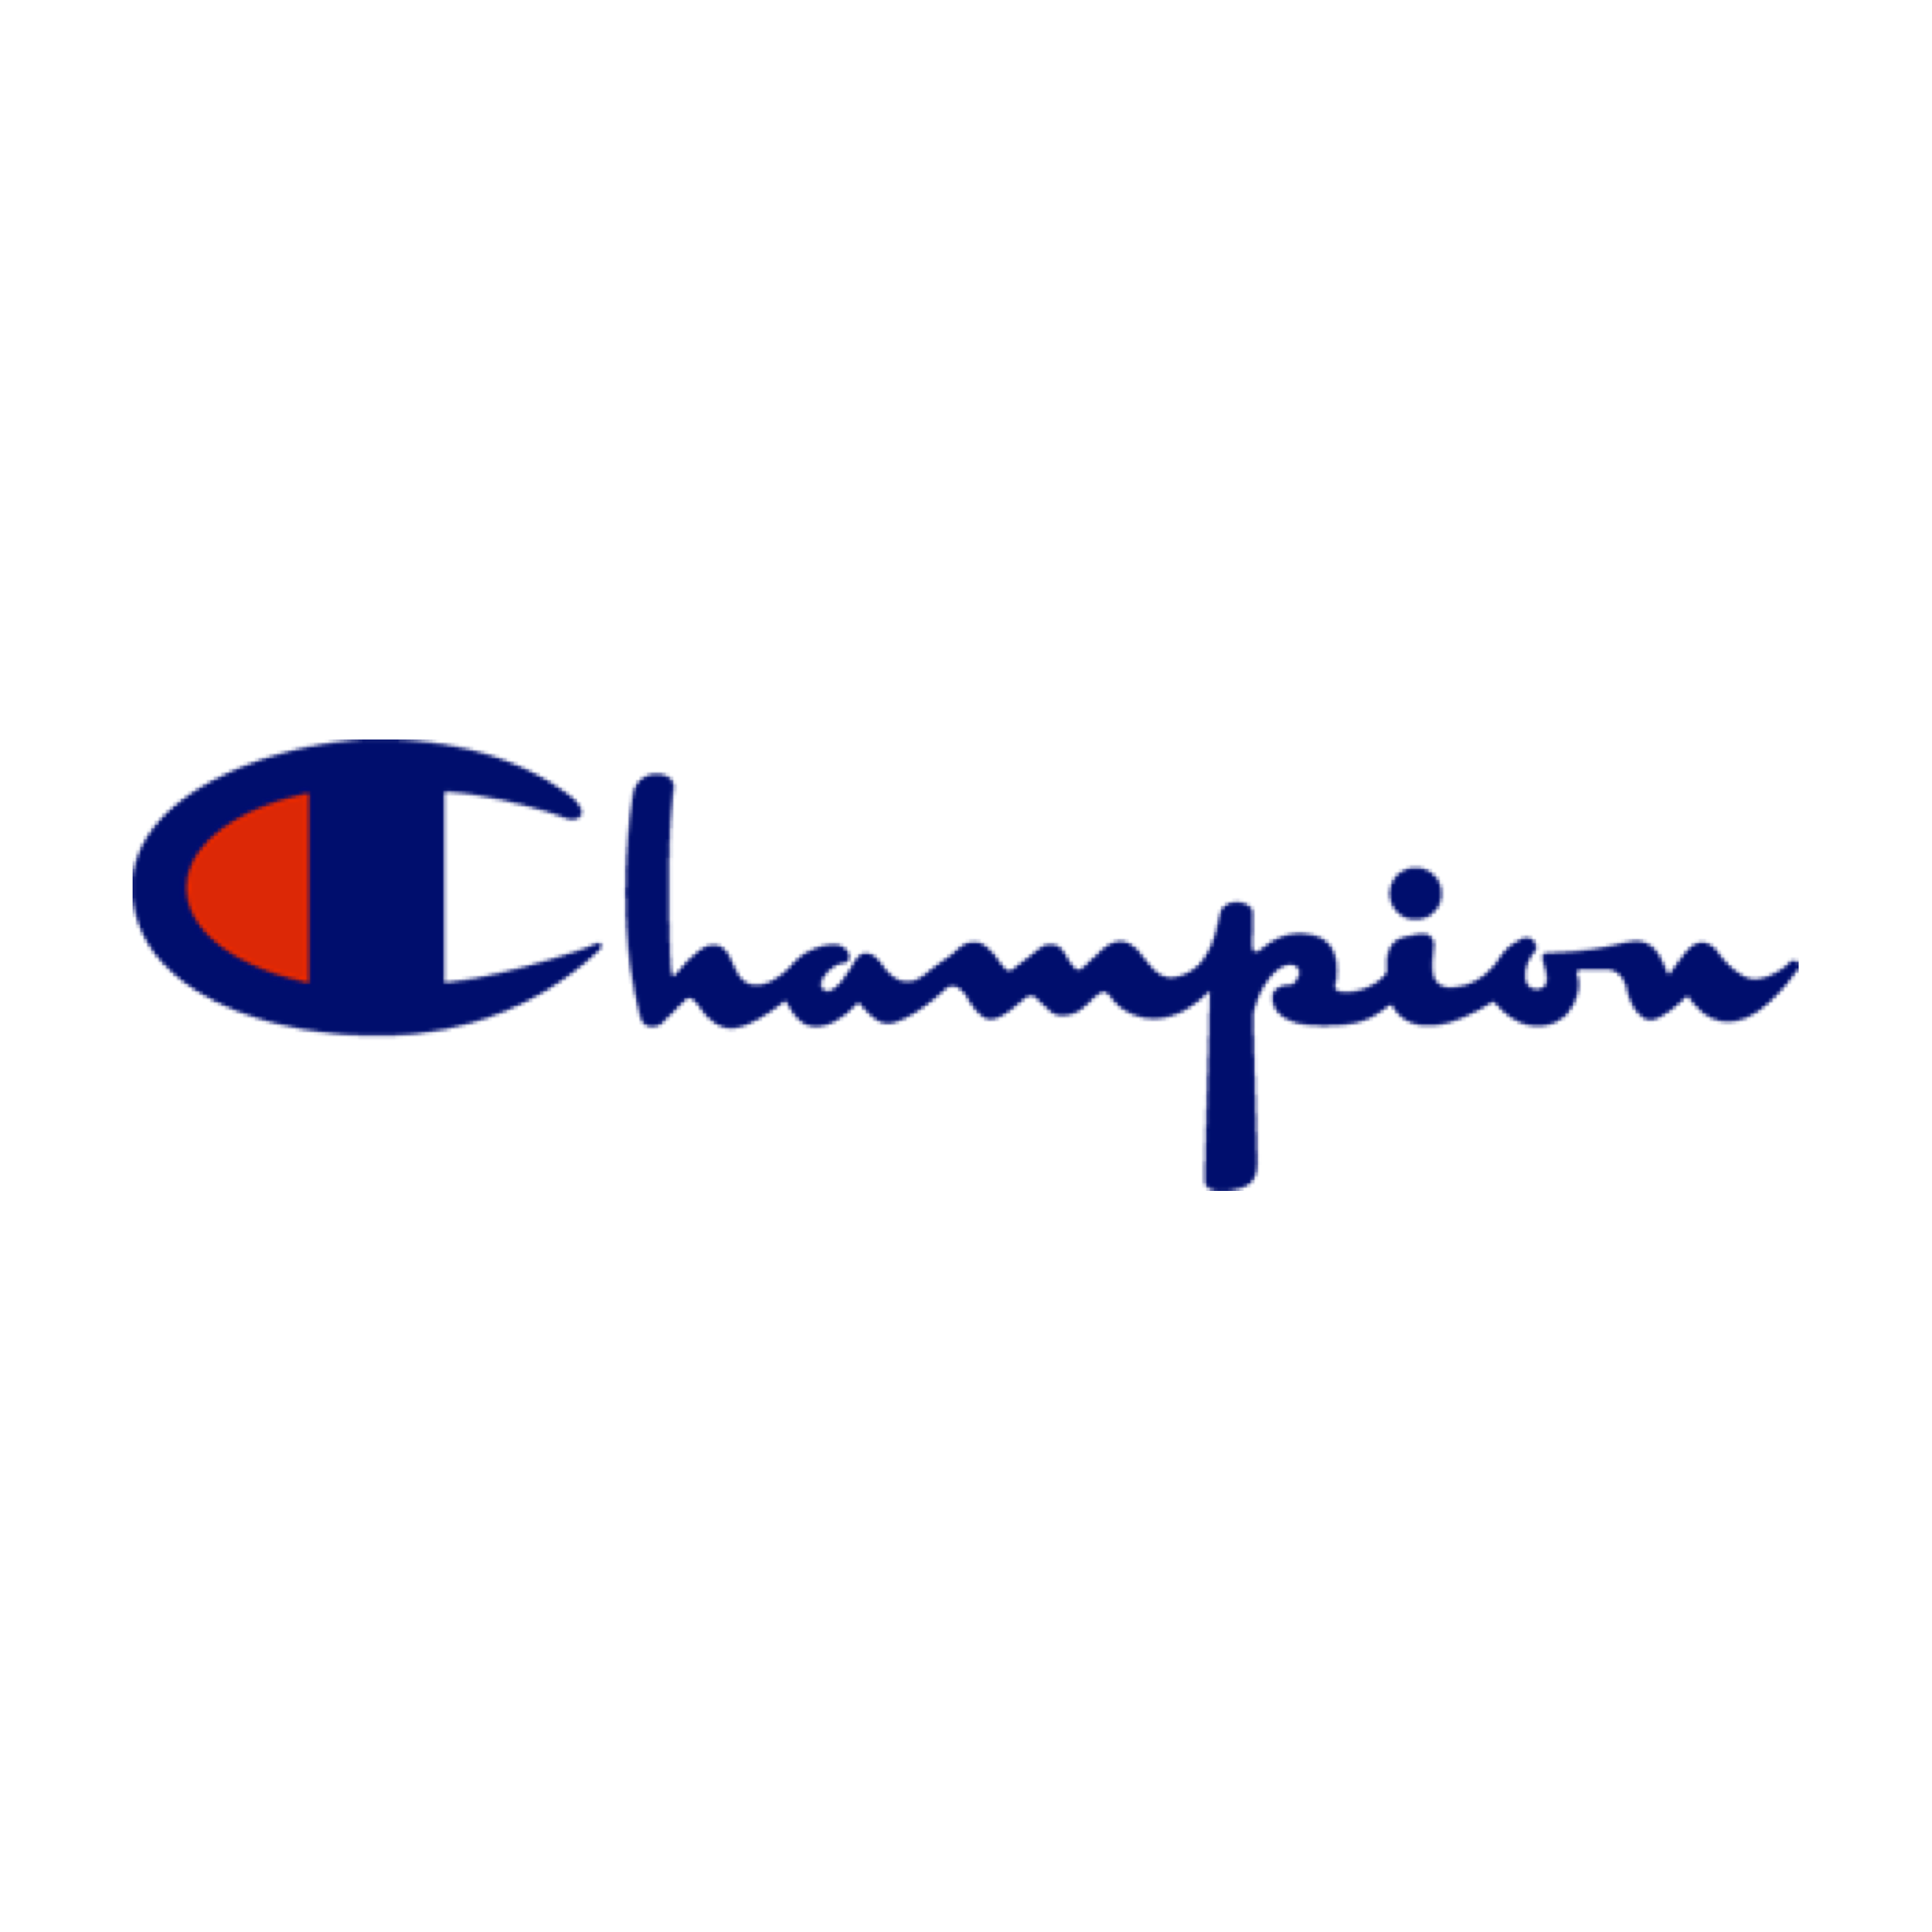 Champion Clothing Line Logo - Champion | BRANDS in 2019 | Champion logo, Champion, Logos